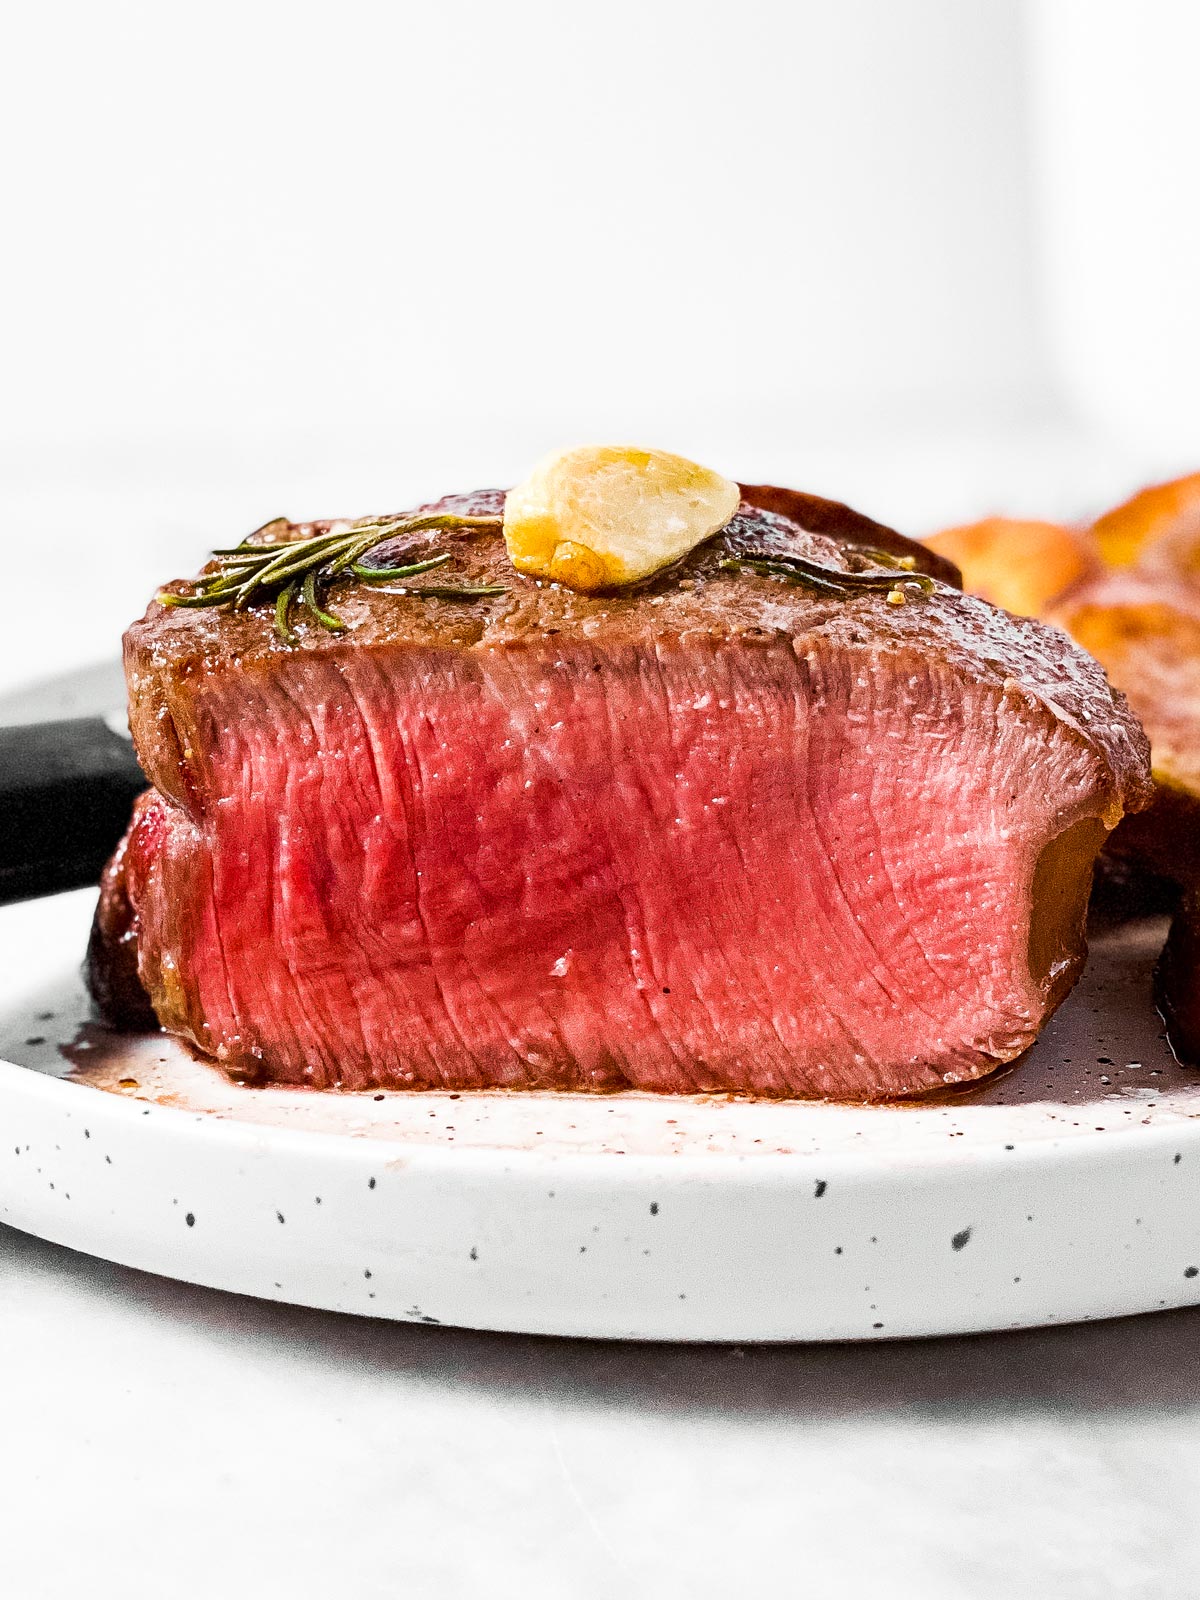 frontal view of sliced filet mignon on white plate